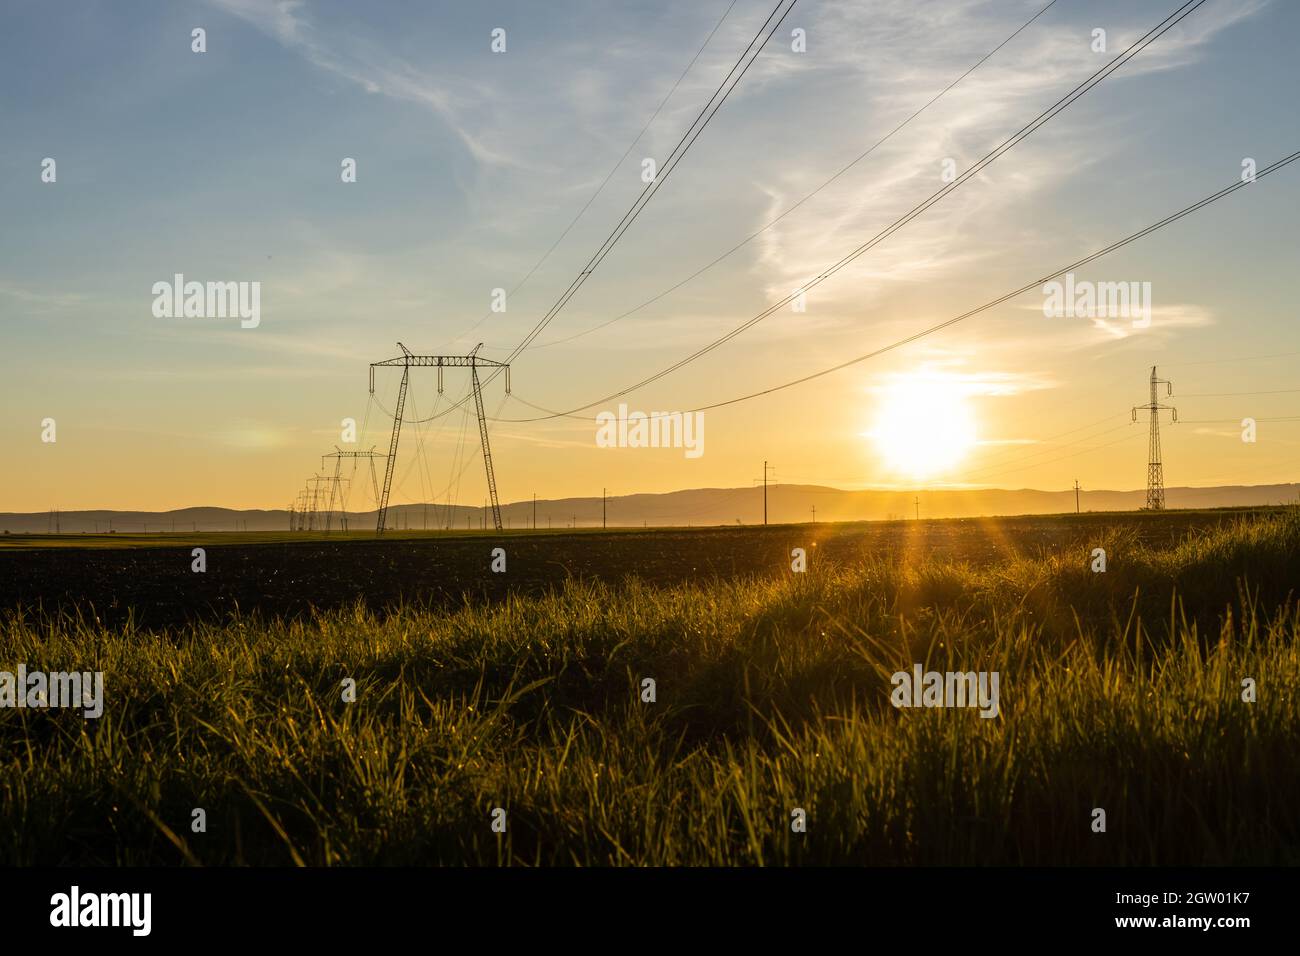 High voltage electric transmission towers and power lines at sunset. Stock Photo